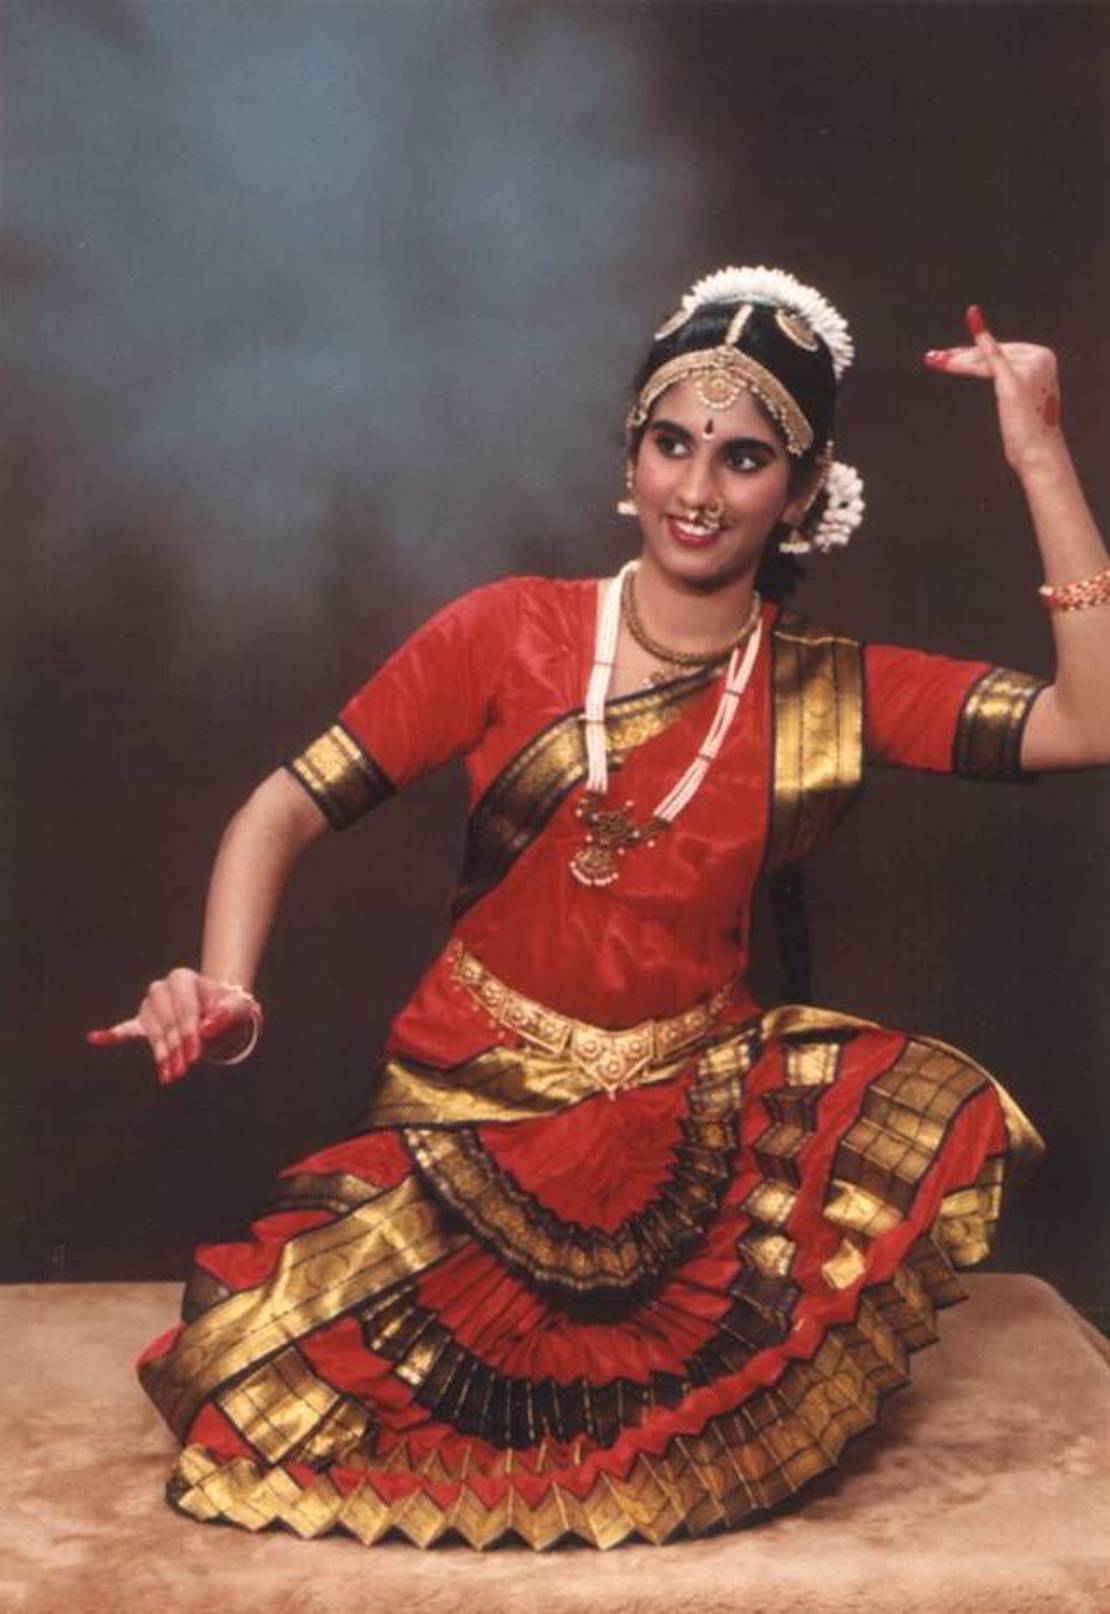 Aruna Rao, D.D.S., studied a South Indian form of classical dance for almost 20 years.